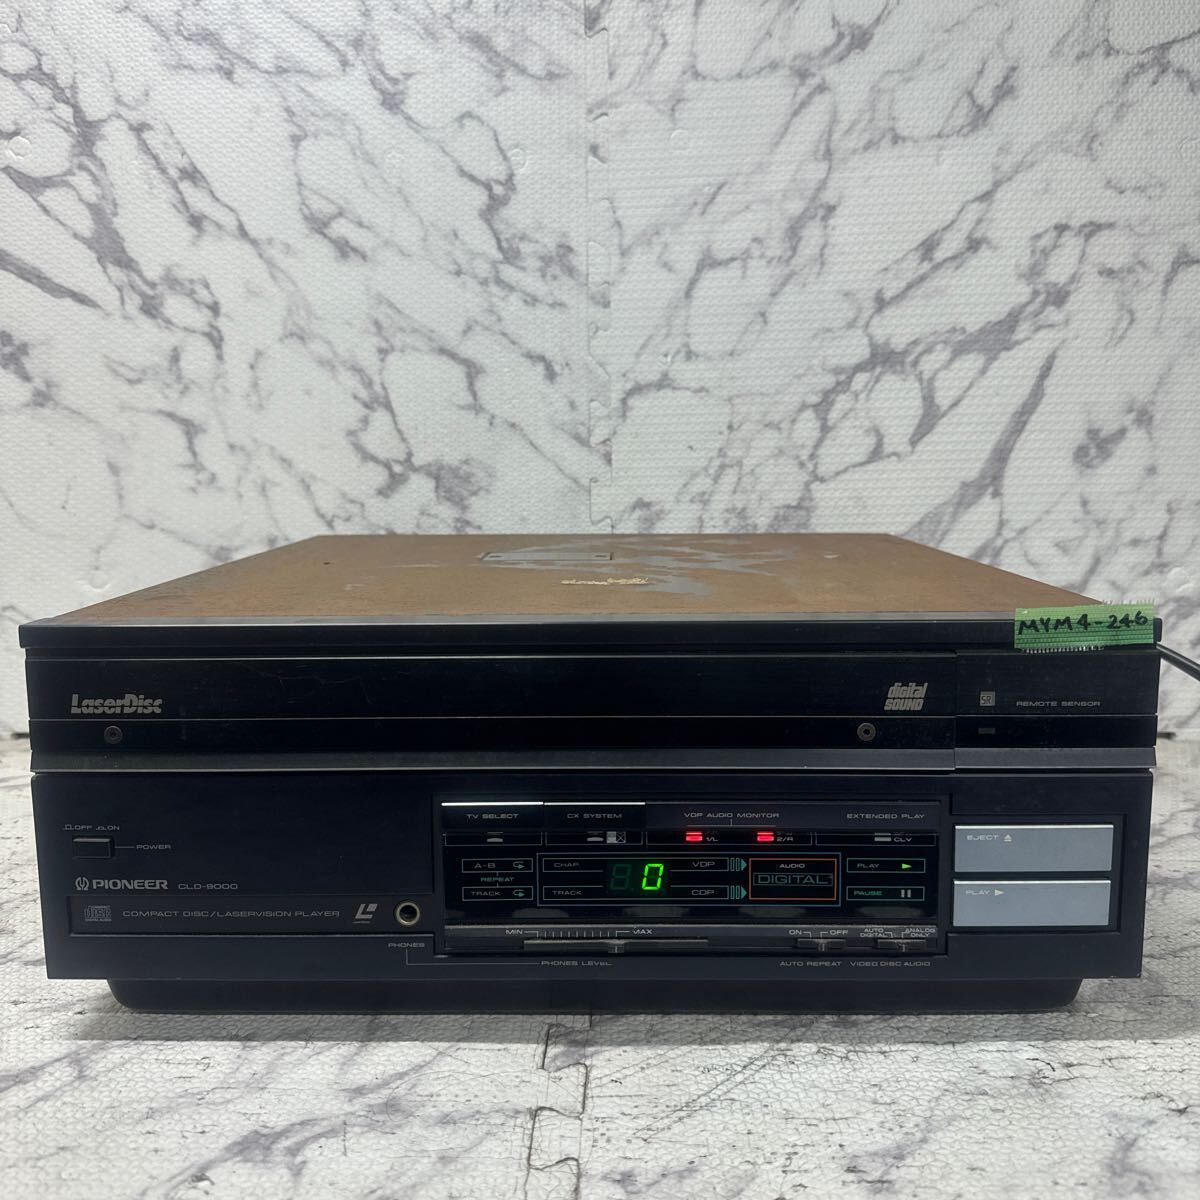 MYM4-246 super-discount PIONEER COMPACT DISC/LASERVISION PLAYER CLD-9000 LD player electrification OK used present condition goods *3 times re-exhibition . liquidation 